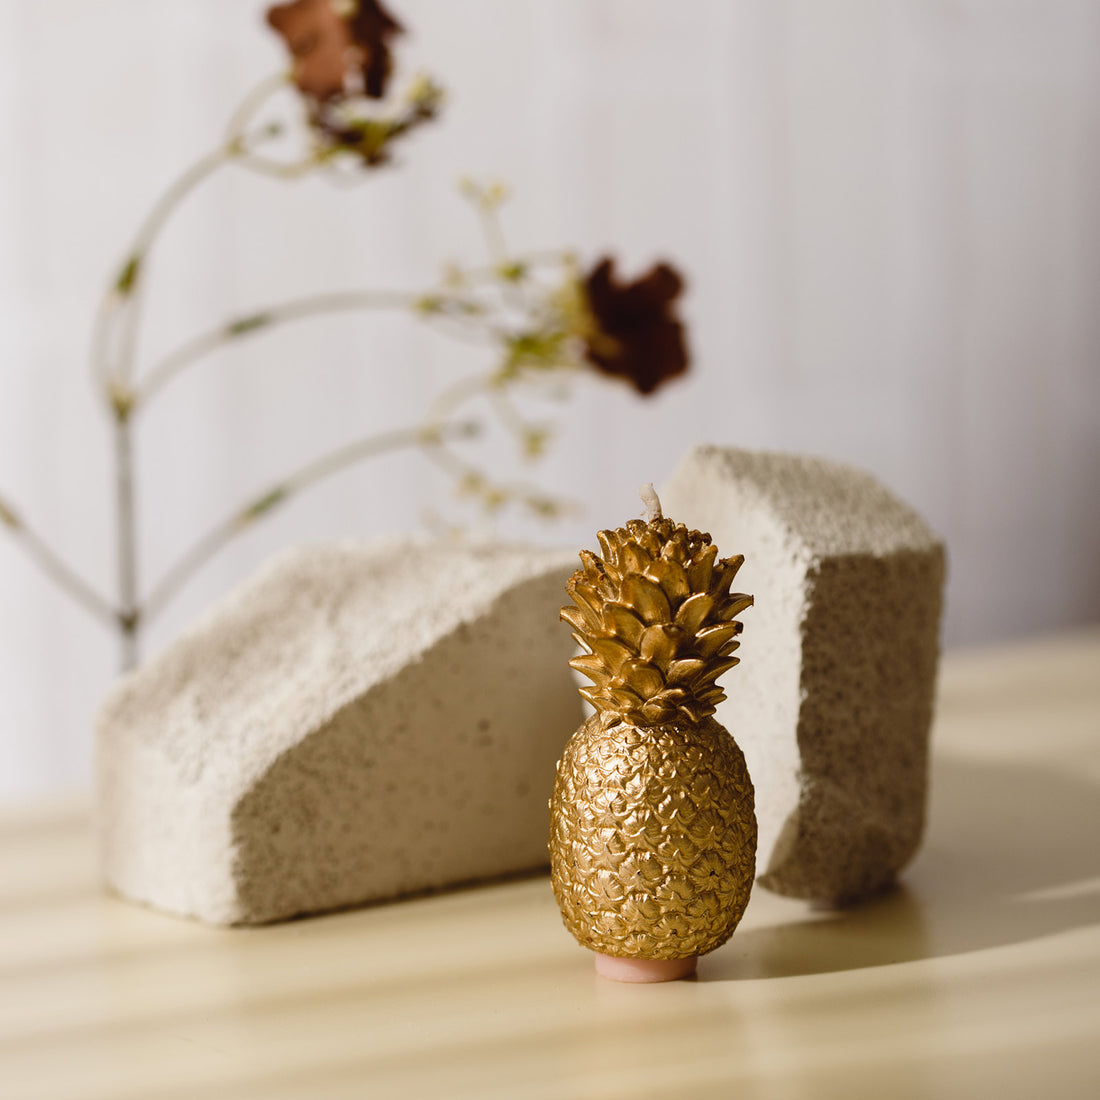 Golden Pineapple Candle from Southlake Gifts will make you home shine.